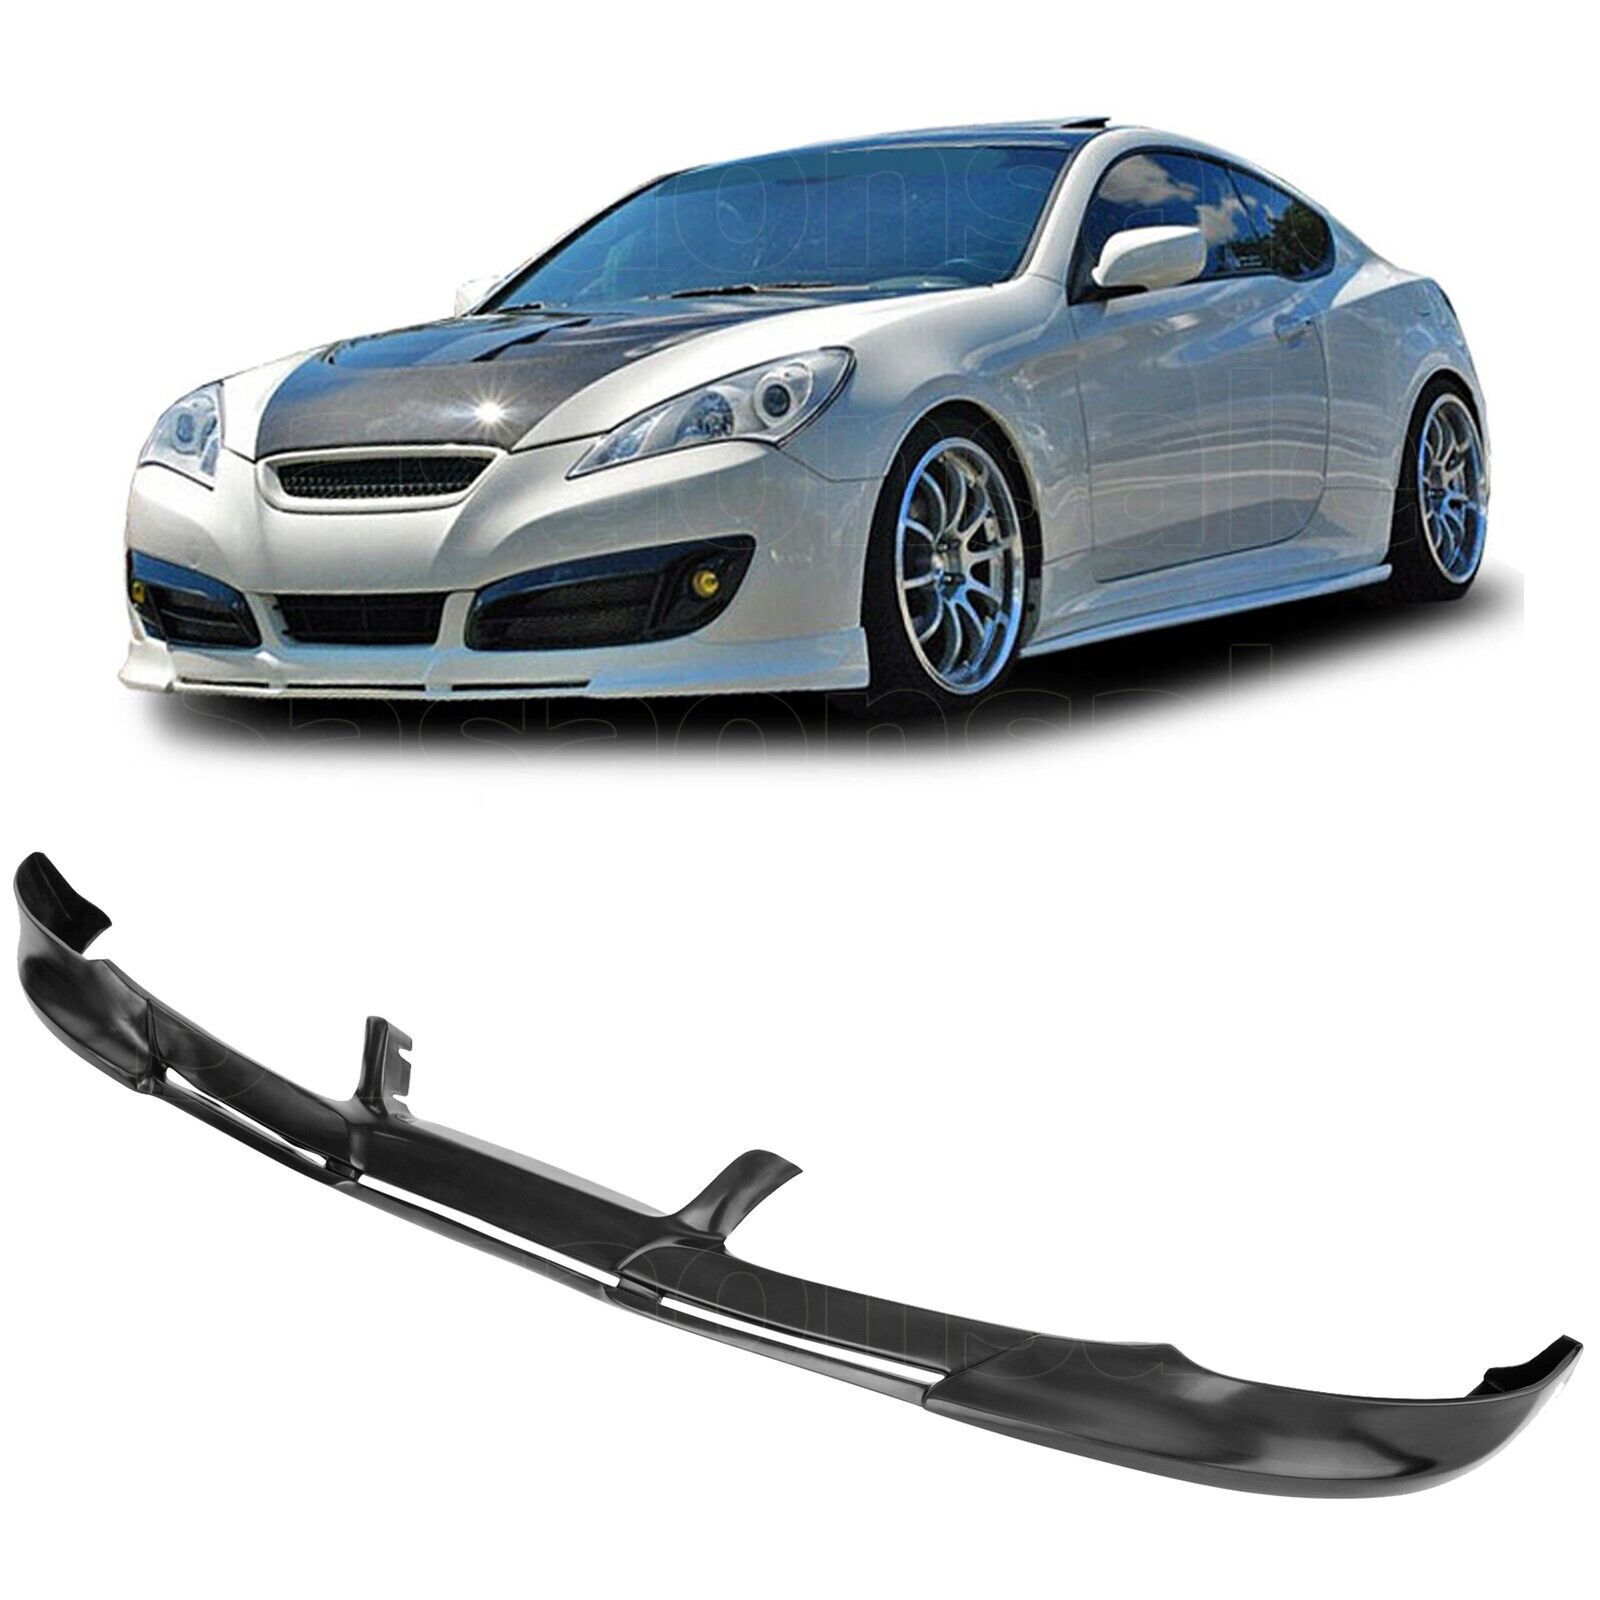 [SASA] Fit for 10-12 Hyundai Genesis Coupe Only PD PU Front Bumper Lip Spoiler